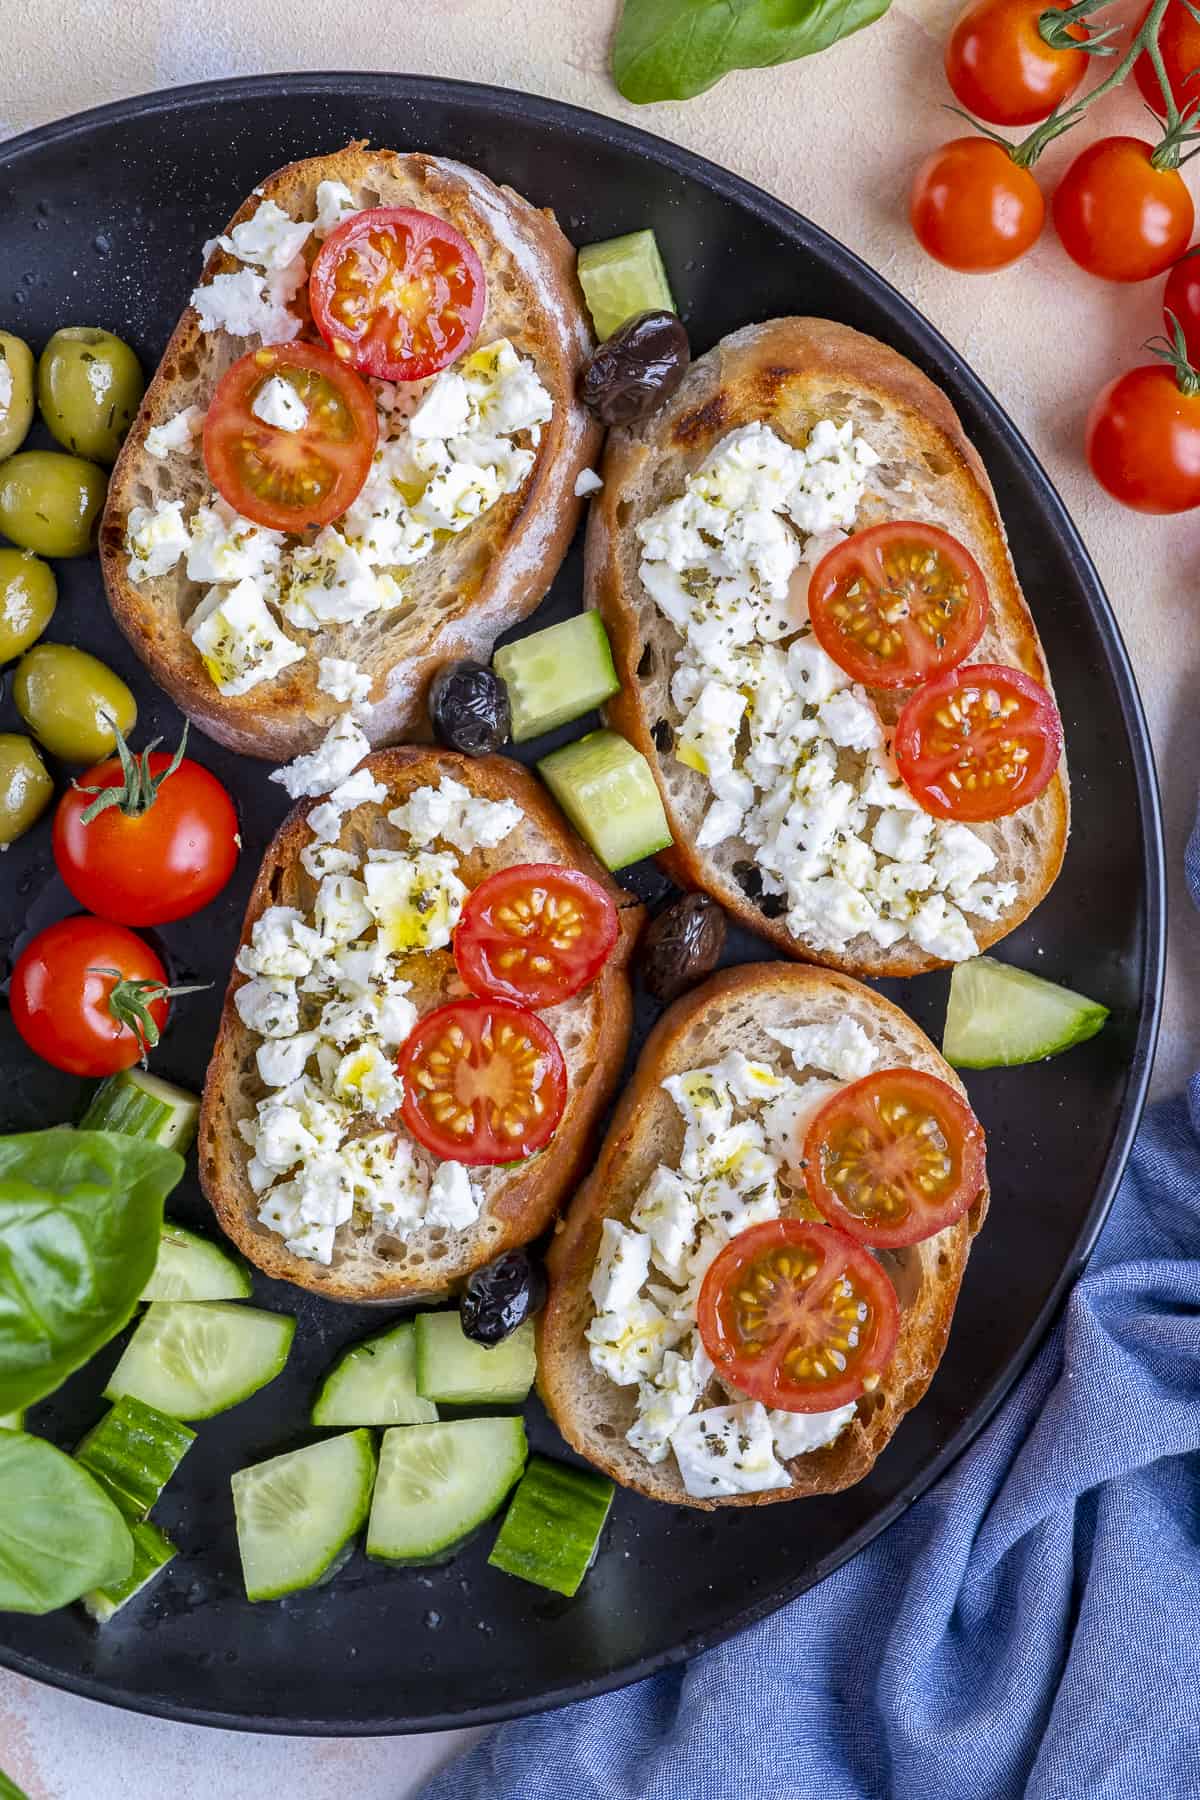 Small open sandwiches topped with feta crumbles and tomatoes on a black plate.